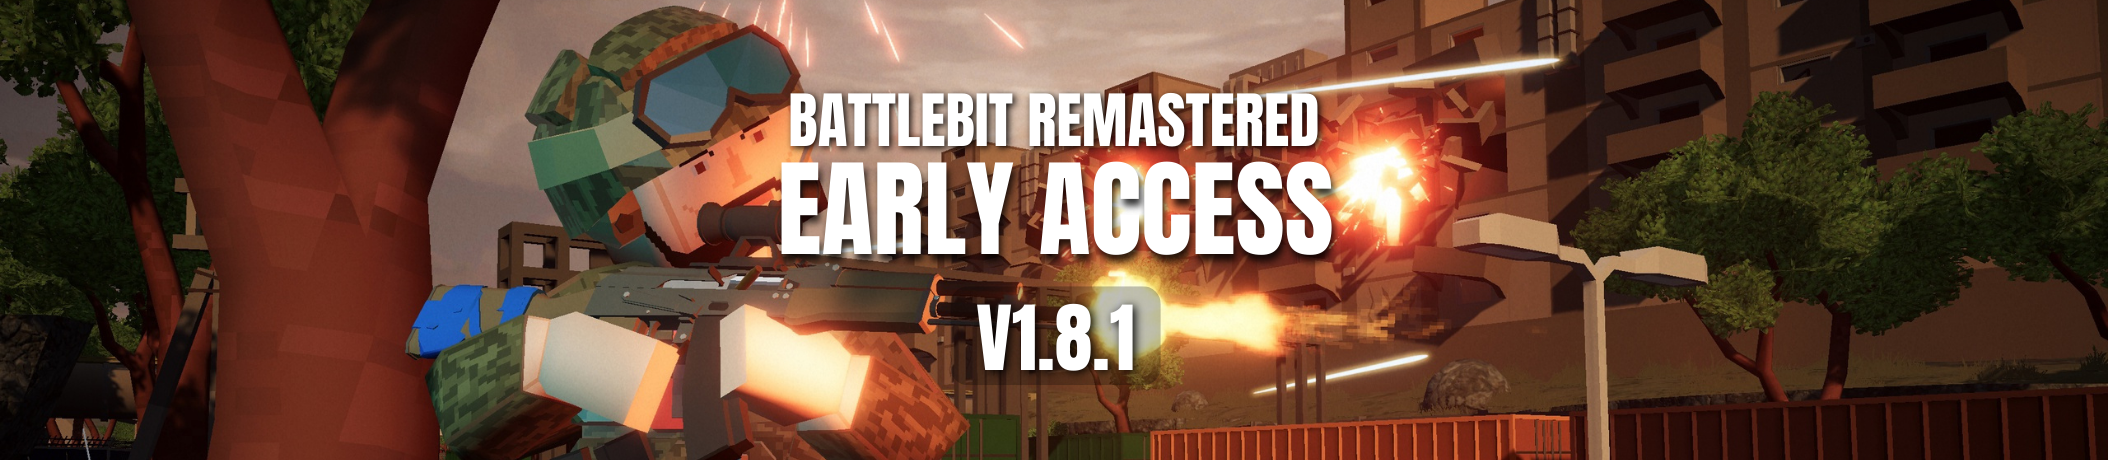 All modes in BattleBit Remastered